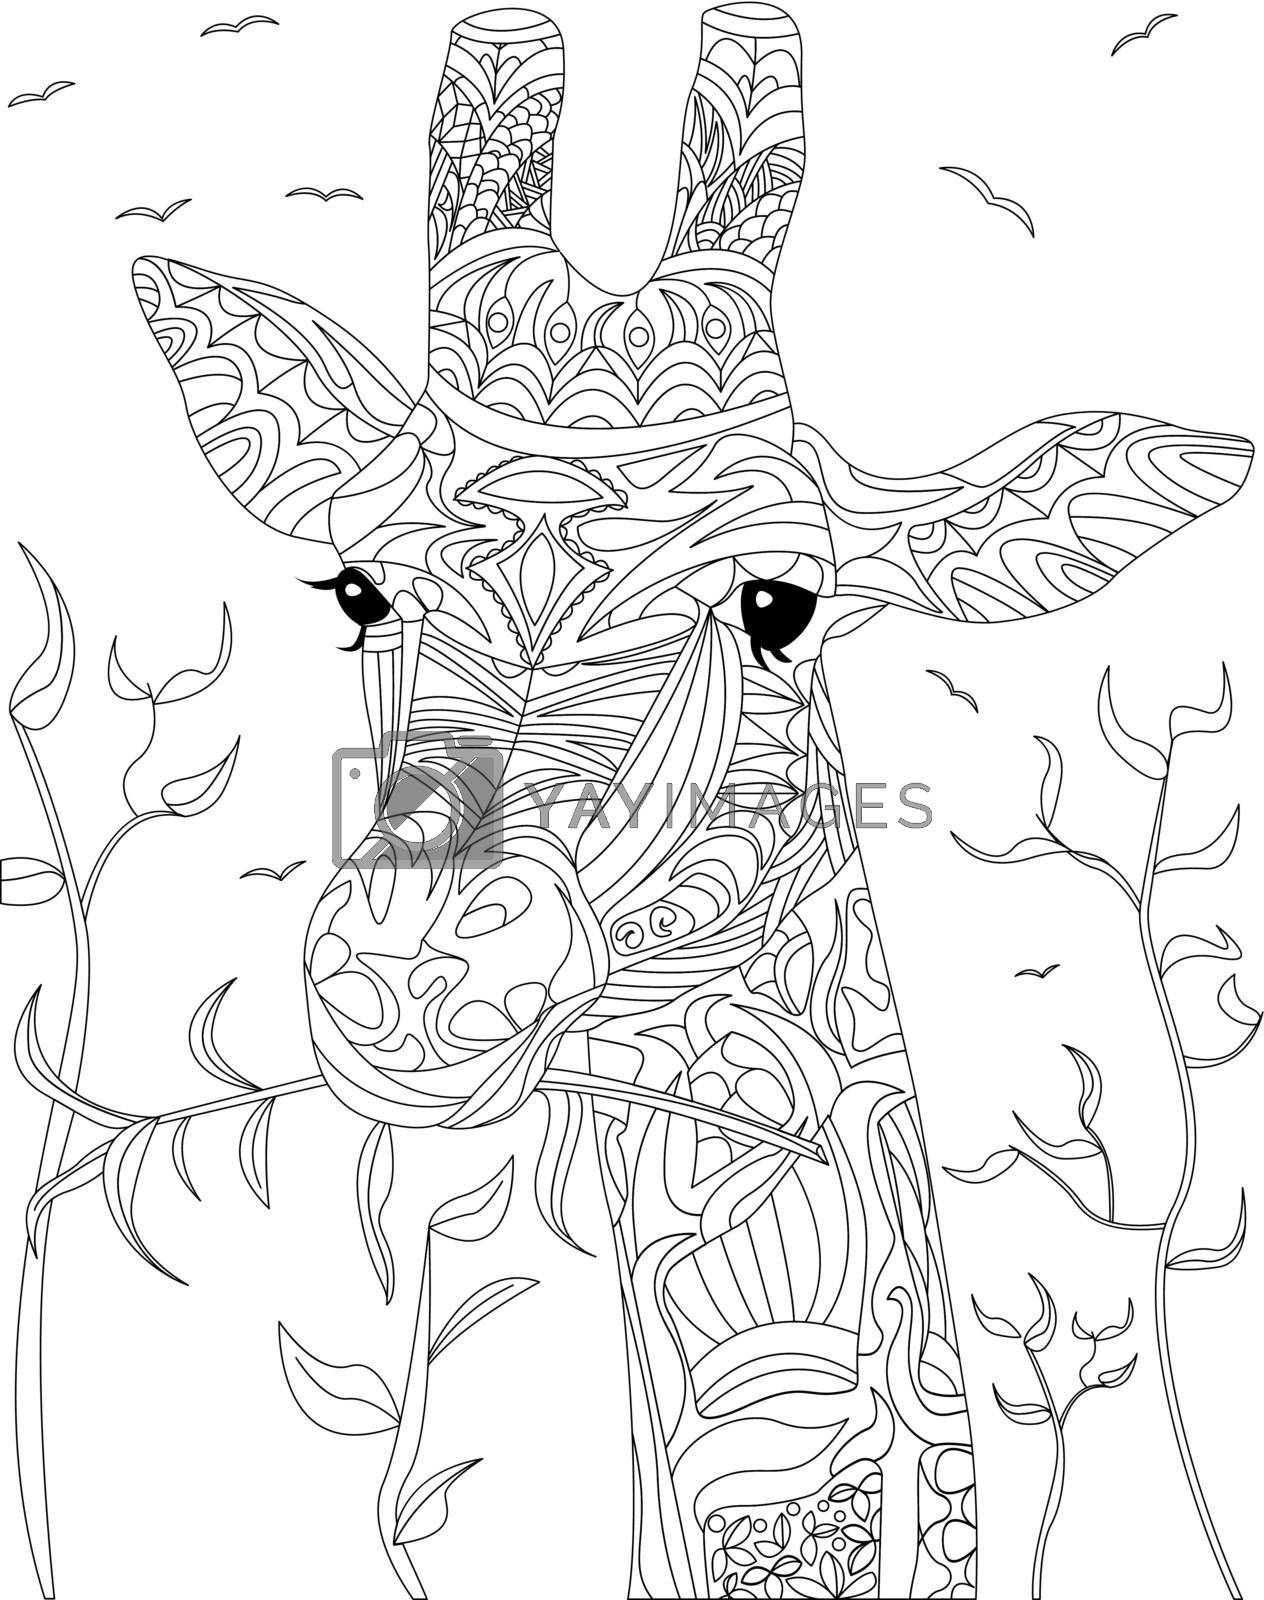 Royalty free image of Coloring Book Page With Head Of Giraffe Looking Calm And Eating Plants. Sheet To Be Colored With Camelopard With Trees In Background And Birds In Sky. by nialowwa